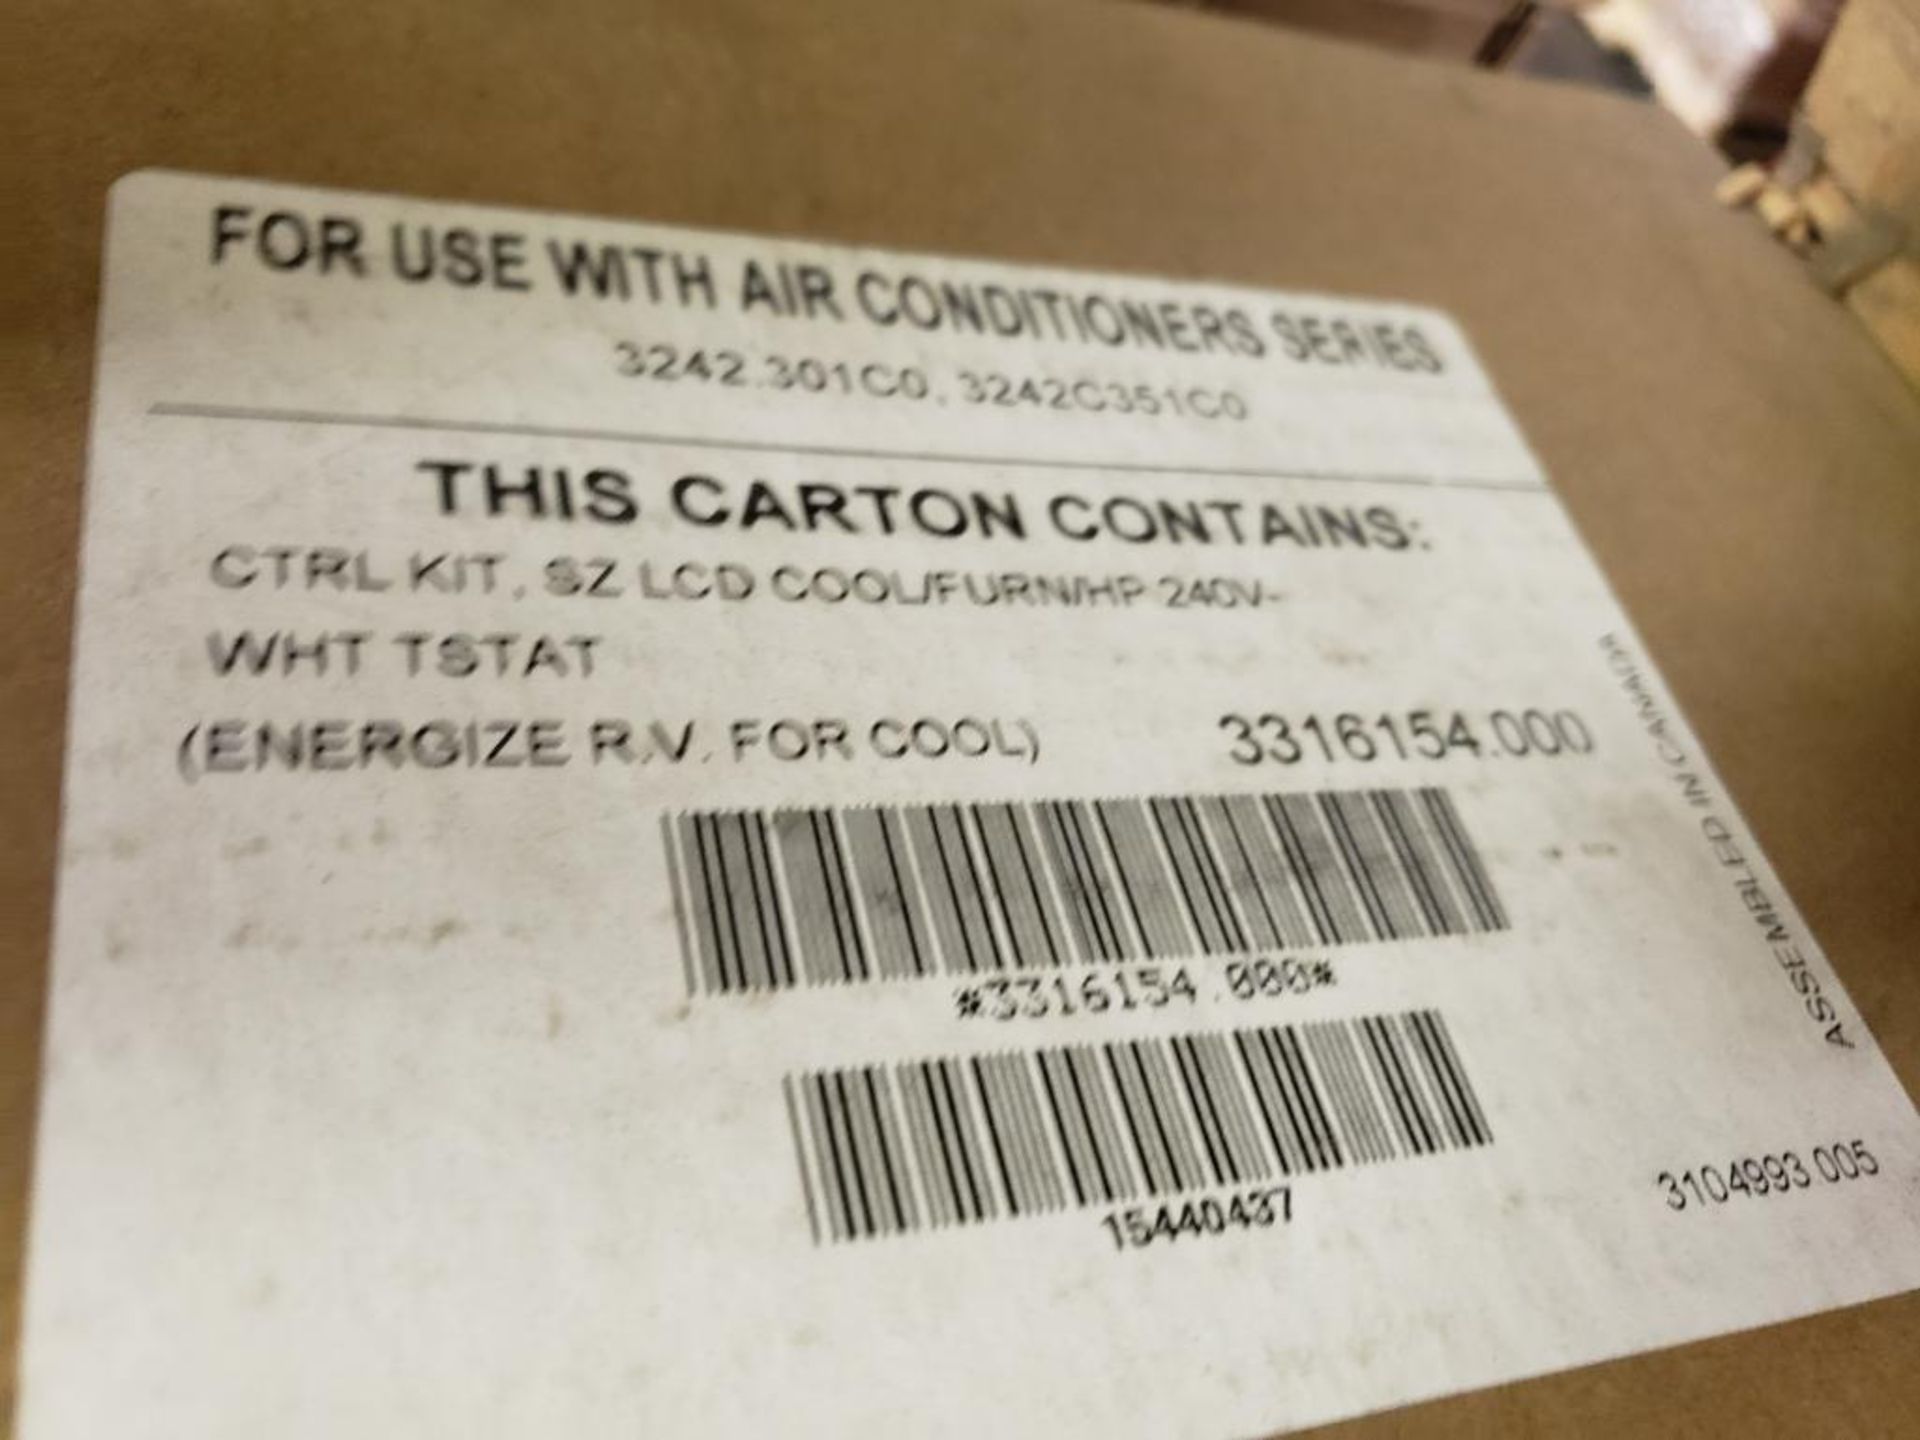 Qty 20 - Dometic air conditioner control. Part number 3316154.000. With Thermostat. New kit in box. - Image 3 of 3